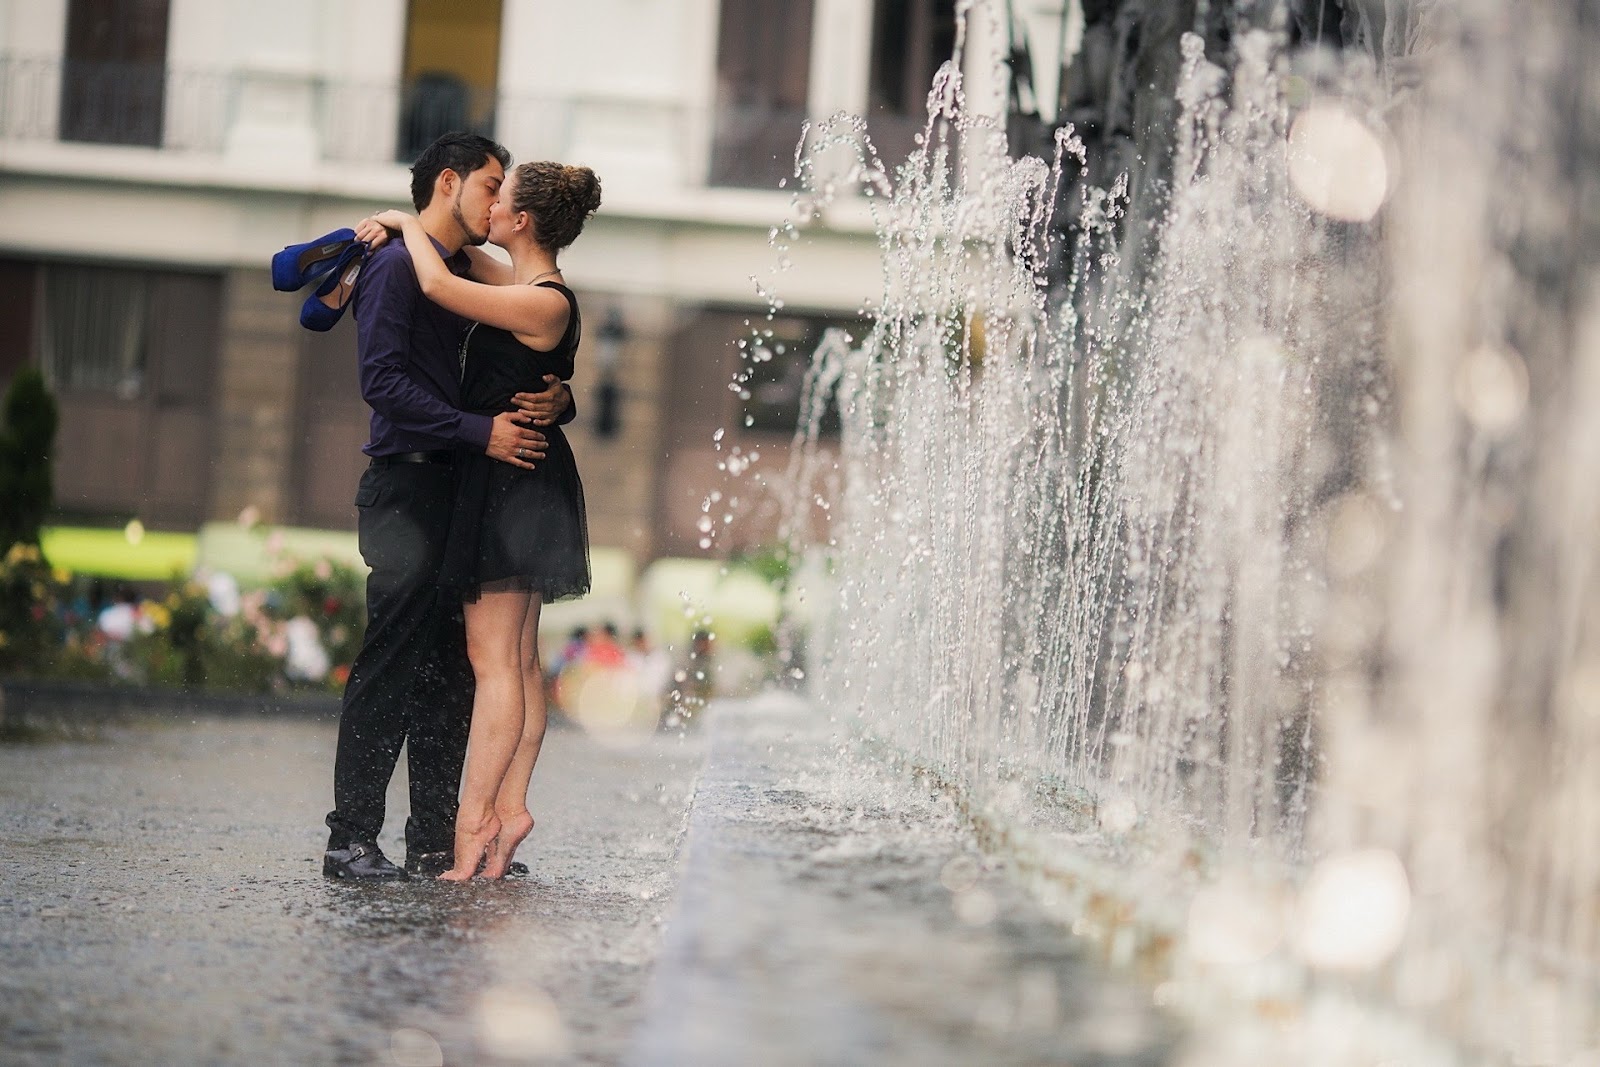 Hot Couple Kissing 1080p HD Wallpapers & Images ~ HD Wallpapers & Images